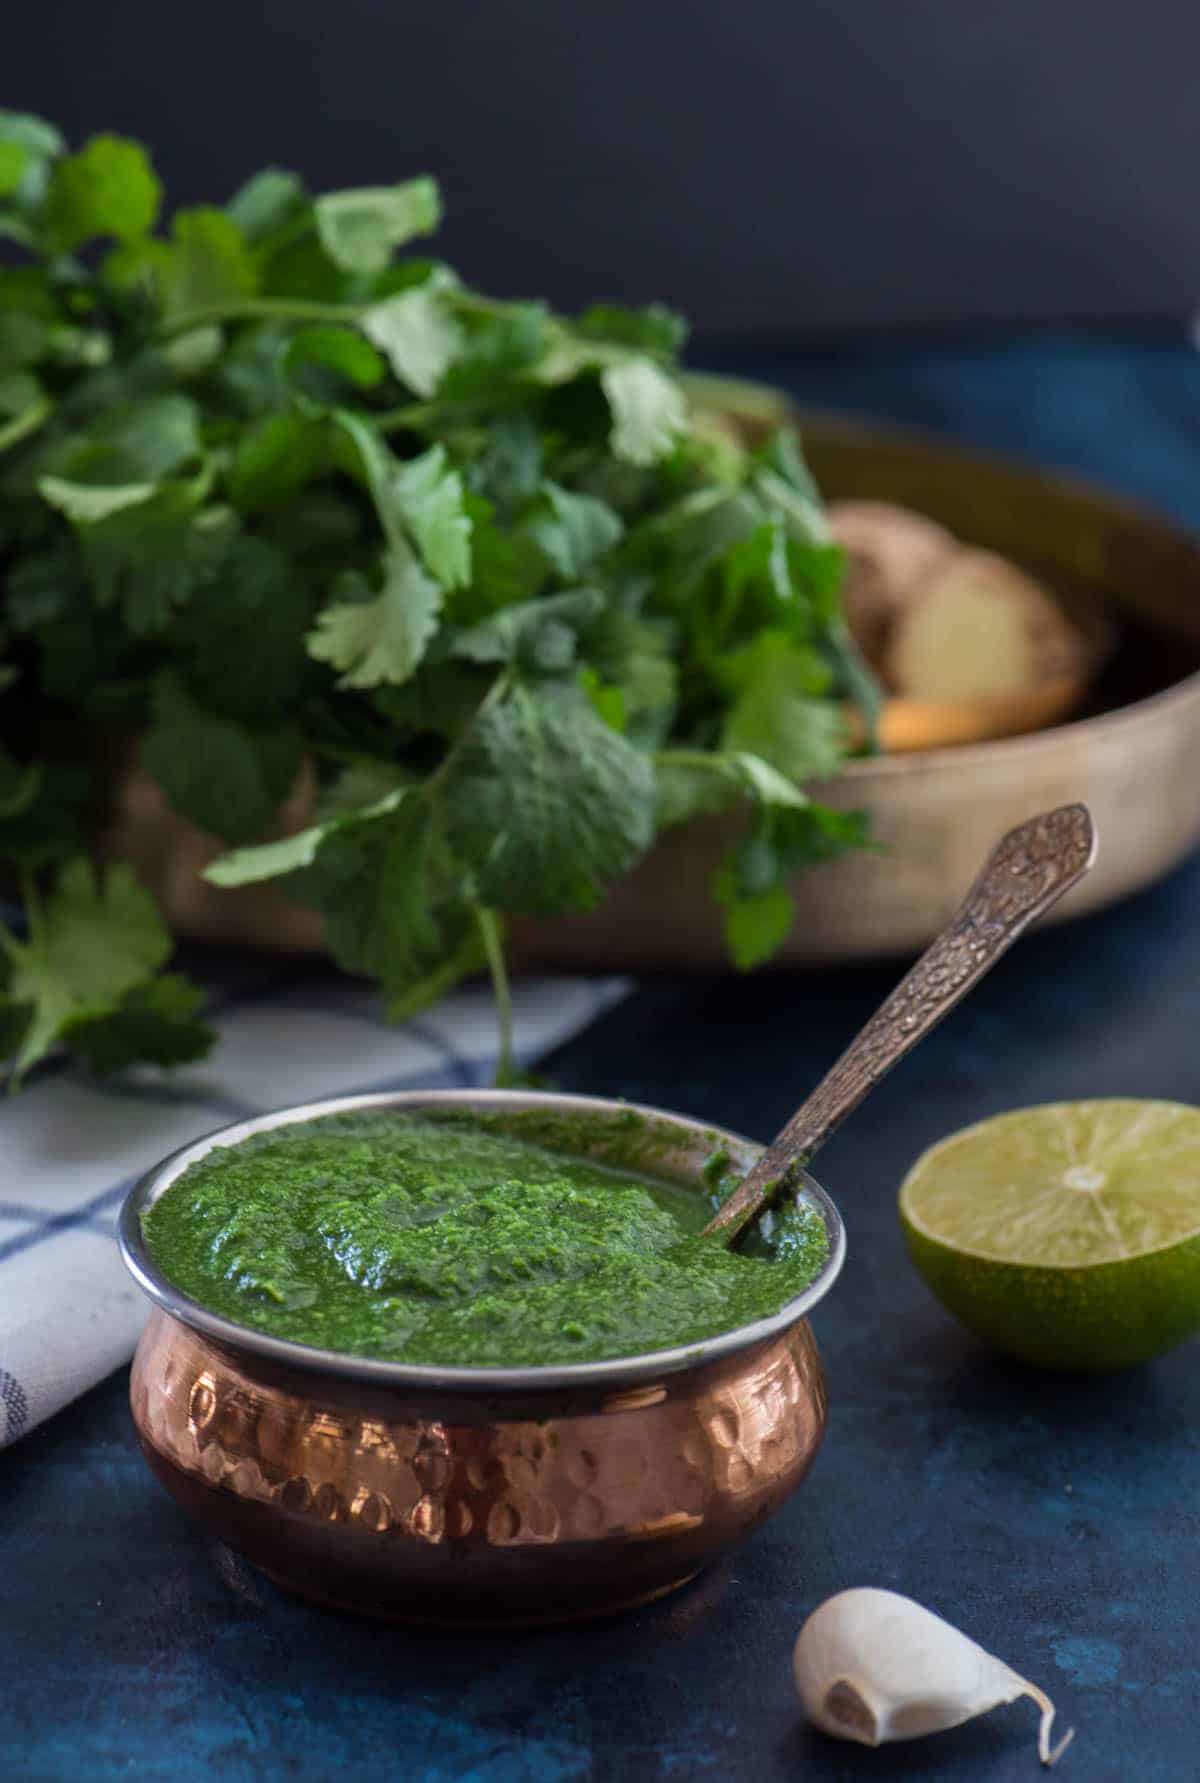 Green chutney served in a copper bowl. Also shown are the ingredients for coriander chutney - 1/2 of lime, garlic, coriander/cilantro leaves